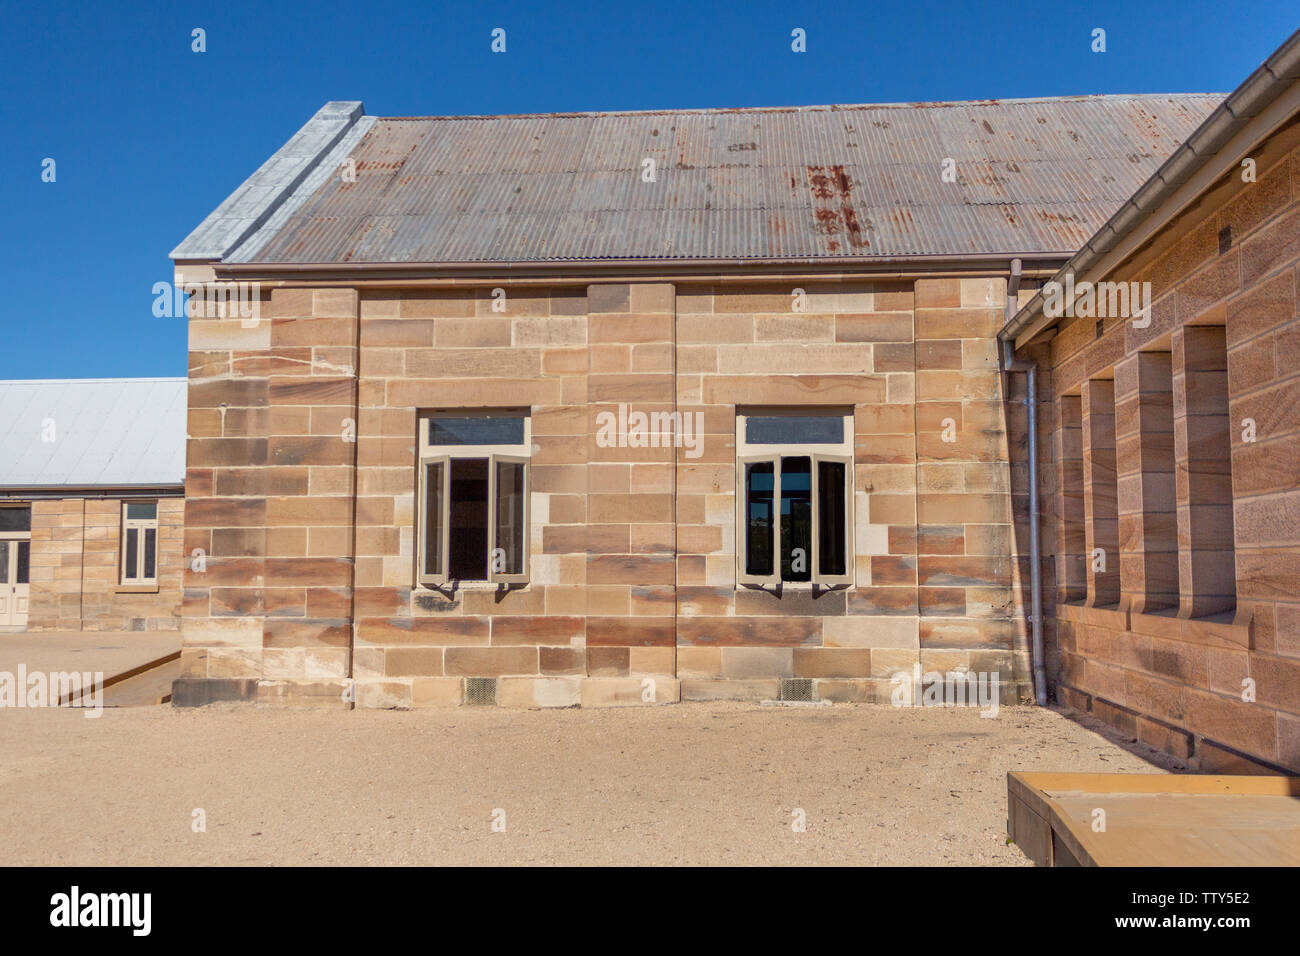 Sandstone convict brick made building with corrugated iron roof, open windows, pebbled courtyard against blue sky Stock Photo